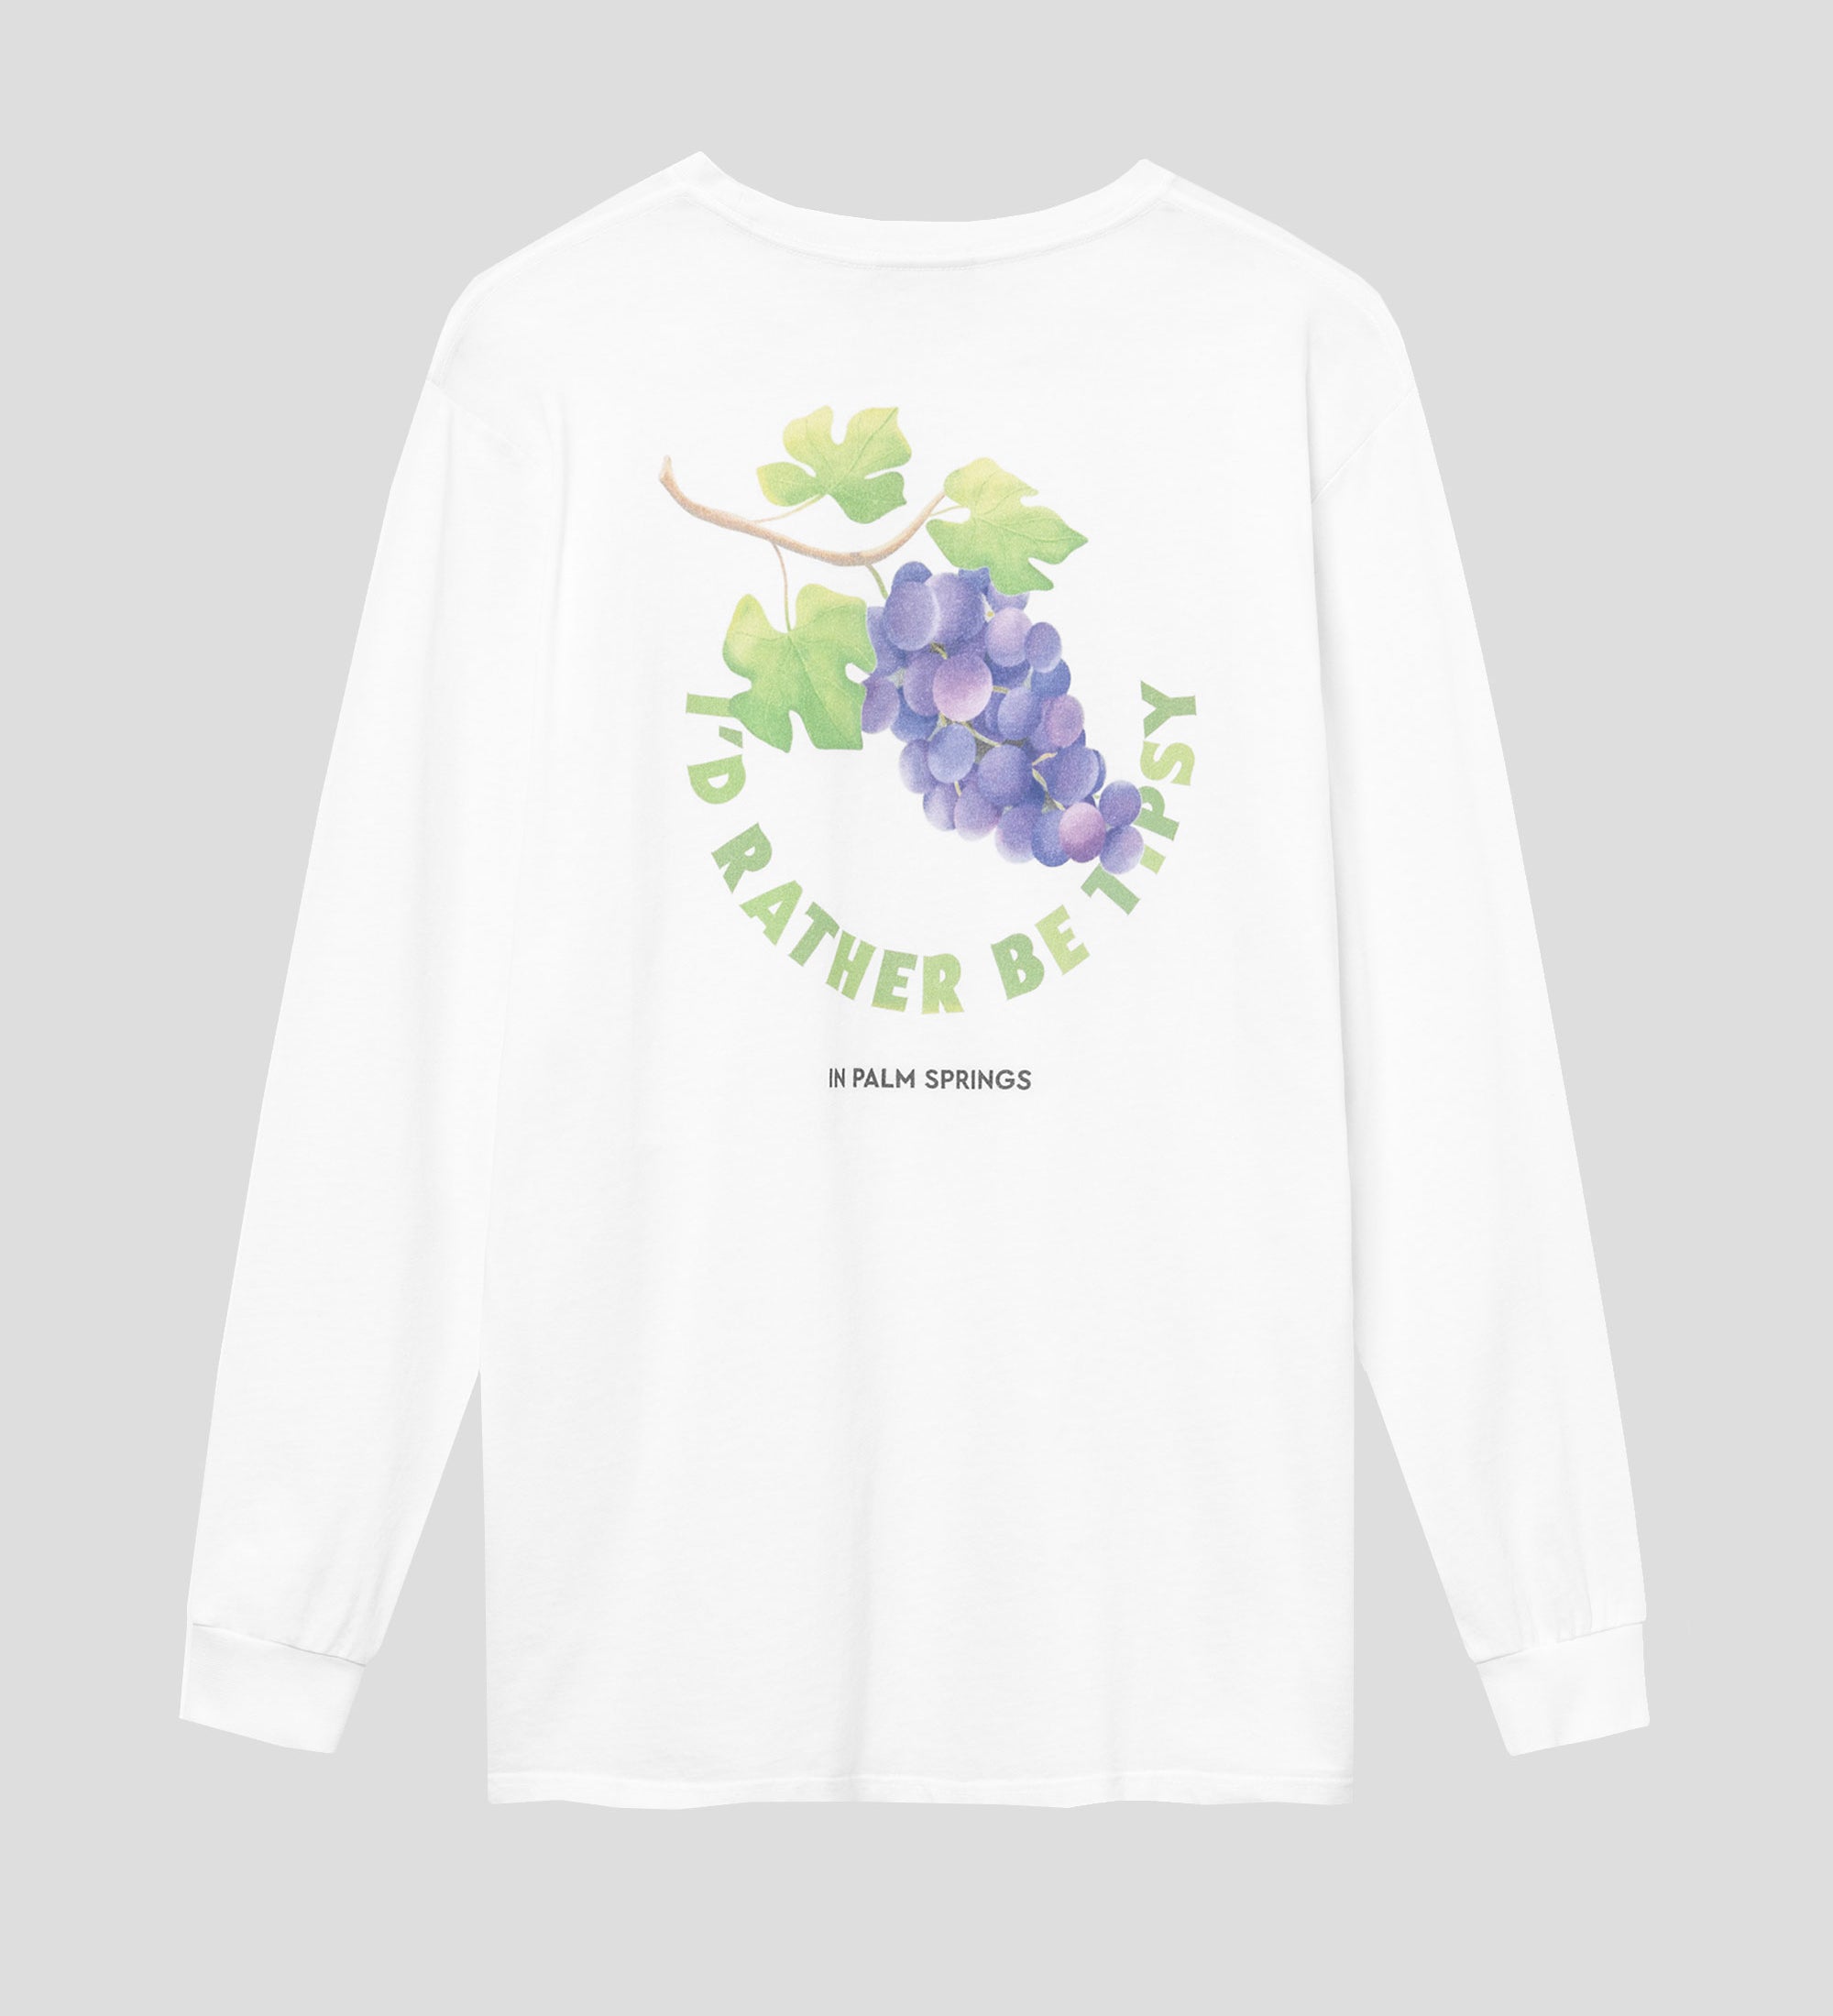 White long-sleeved t-shirt with large back print.